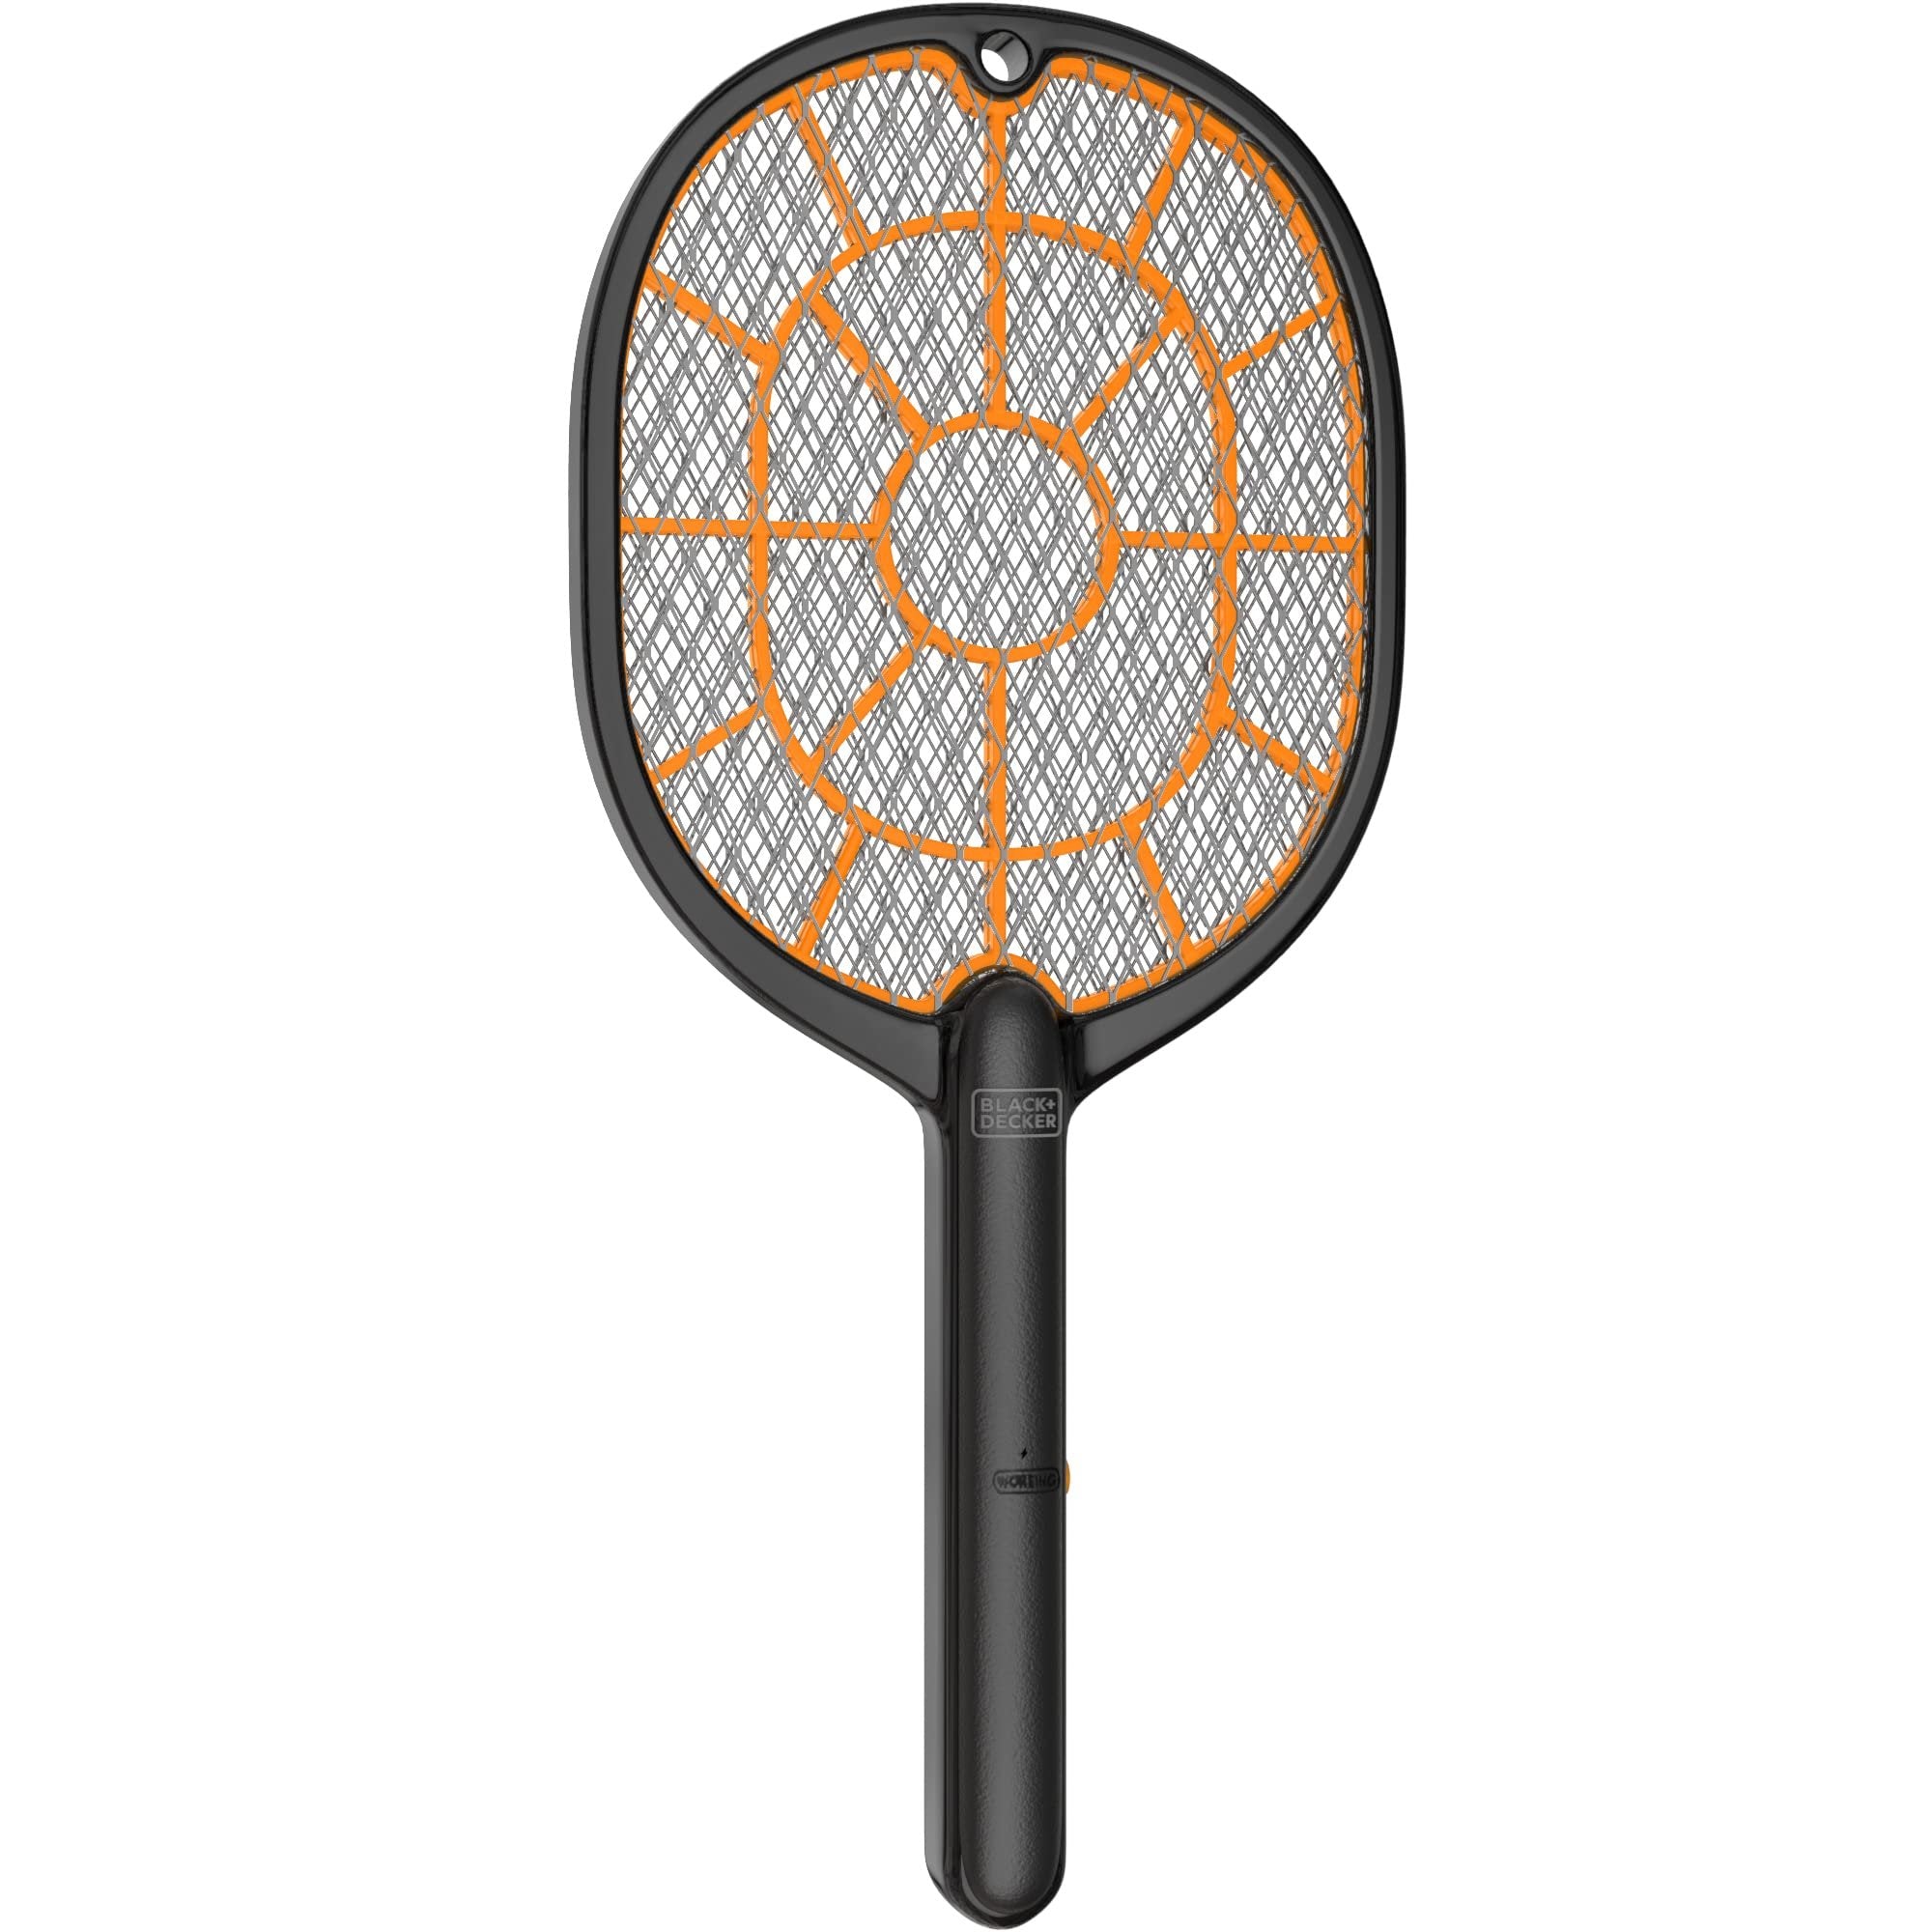 Black+Decker Electric Fly Swatter, Handheld Bug Zapper Racket - Heavy-Duty, Indoor/Outdoor - Battery-Powered - Non-Toxic, Safe for Humans/Pets, Black,